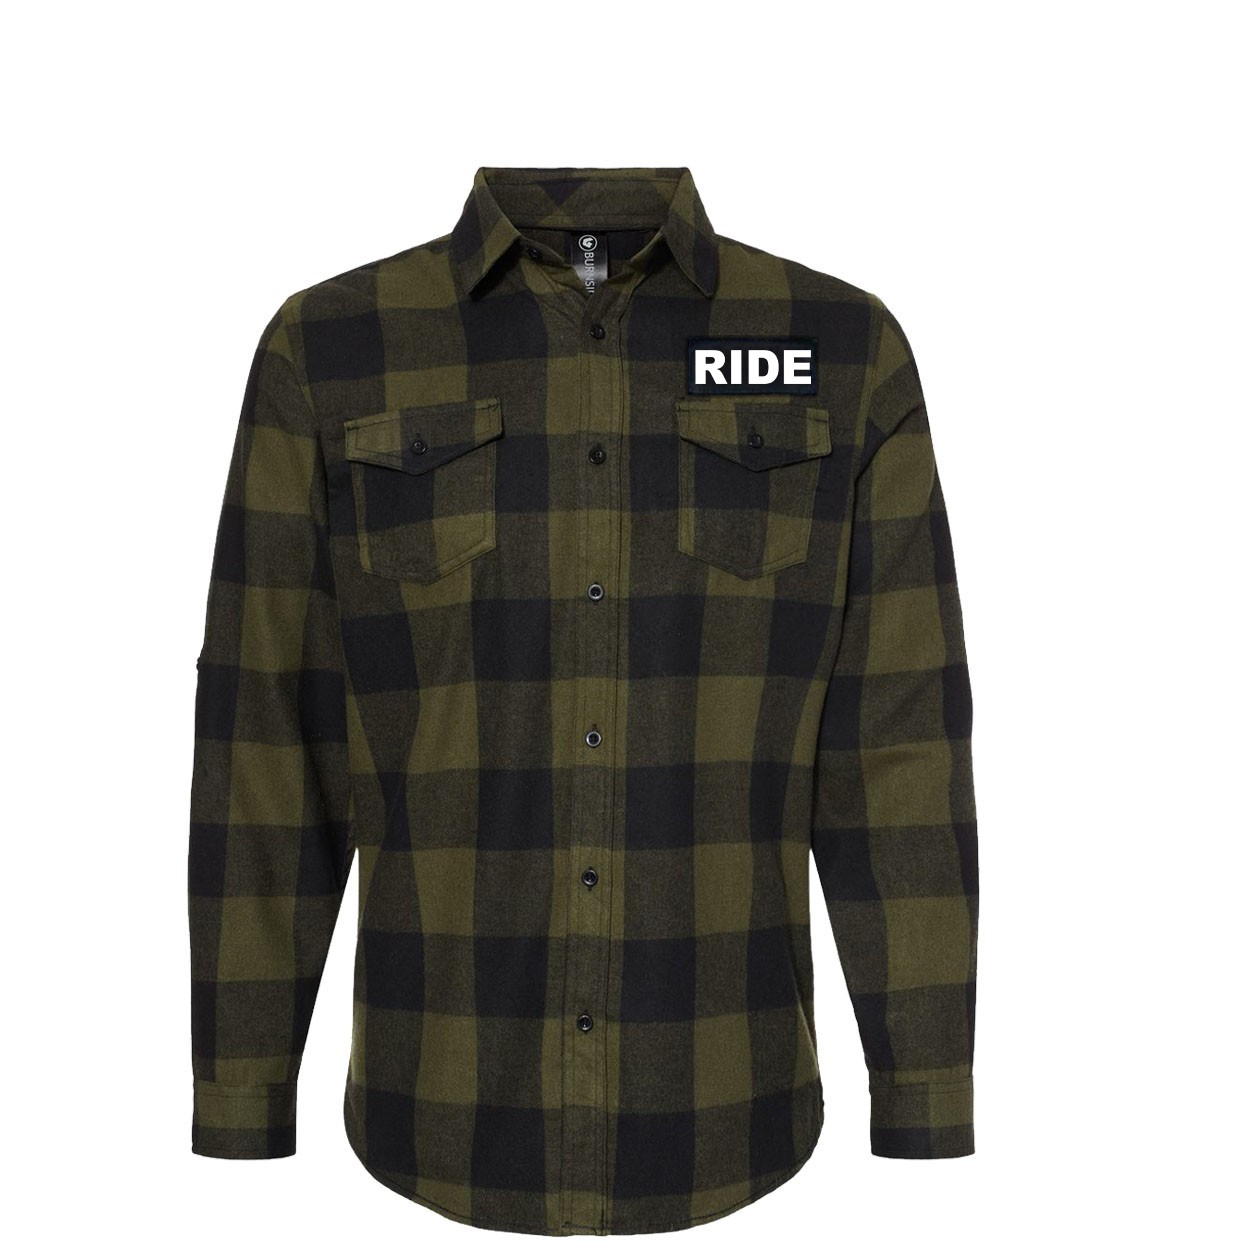 Ride Brand Logo Classic Unisex Long Sleeve Woven Patch Flannel Shirt Army/Black (White Logo)